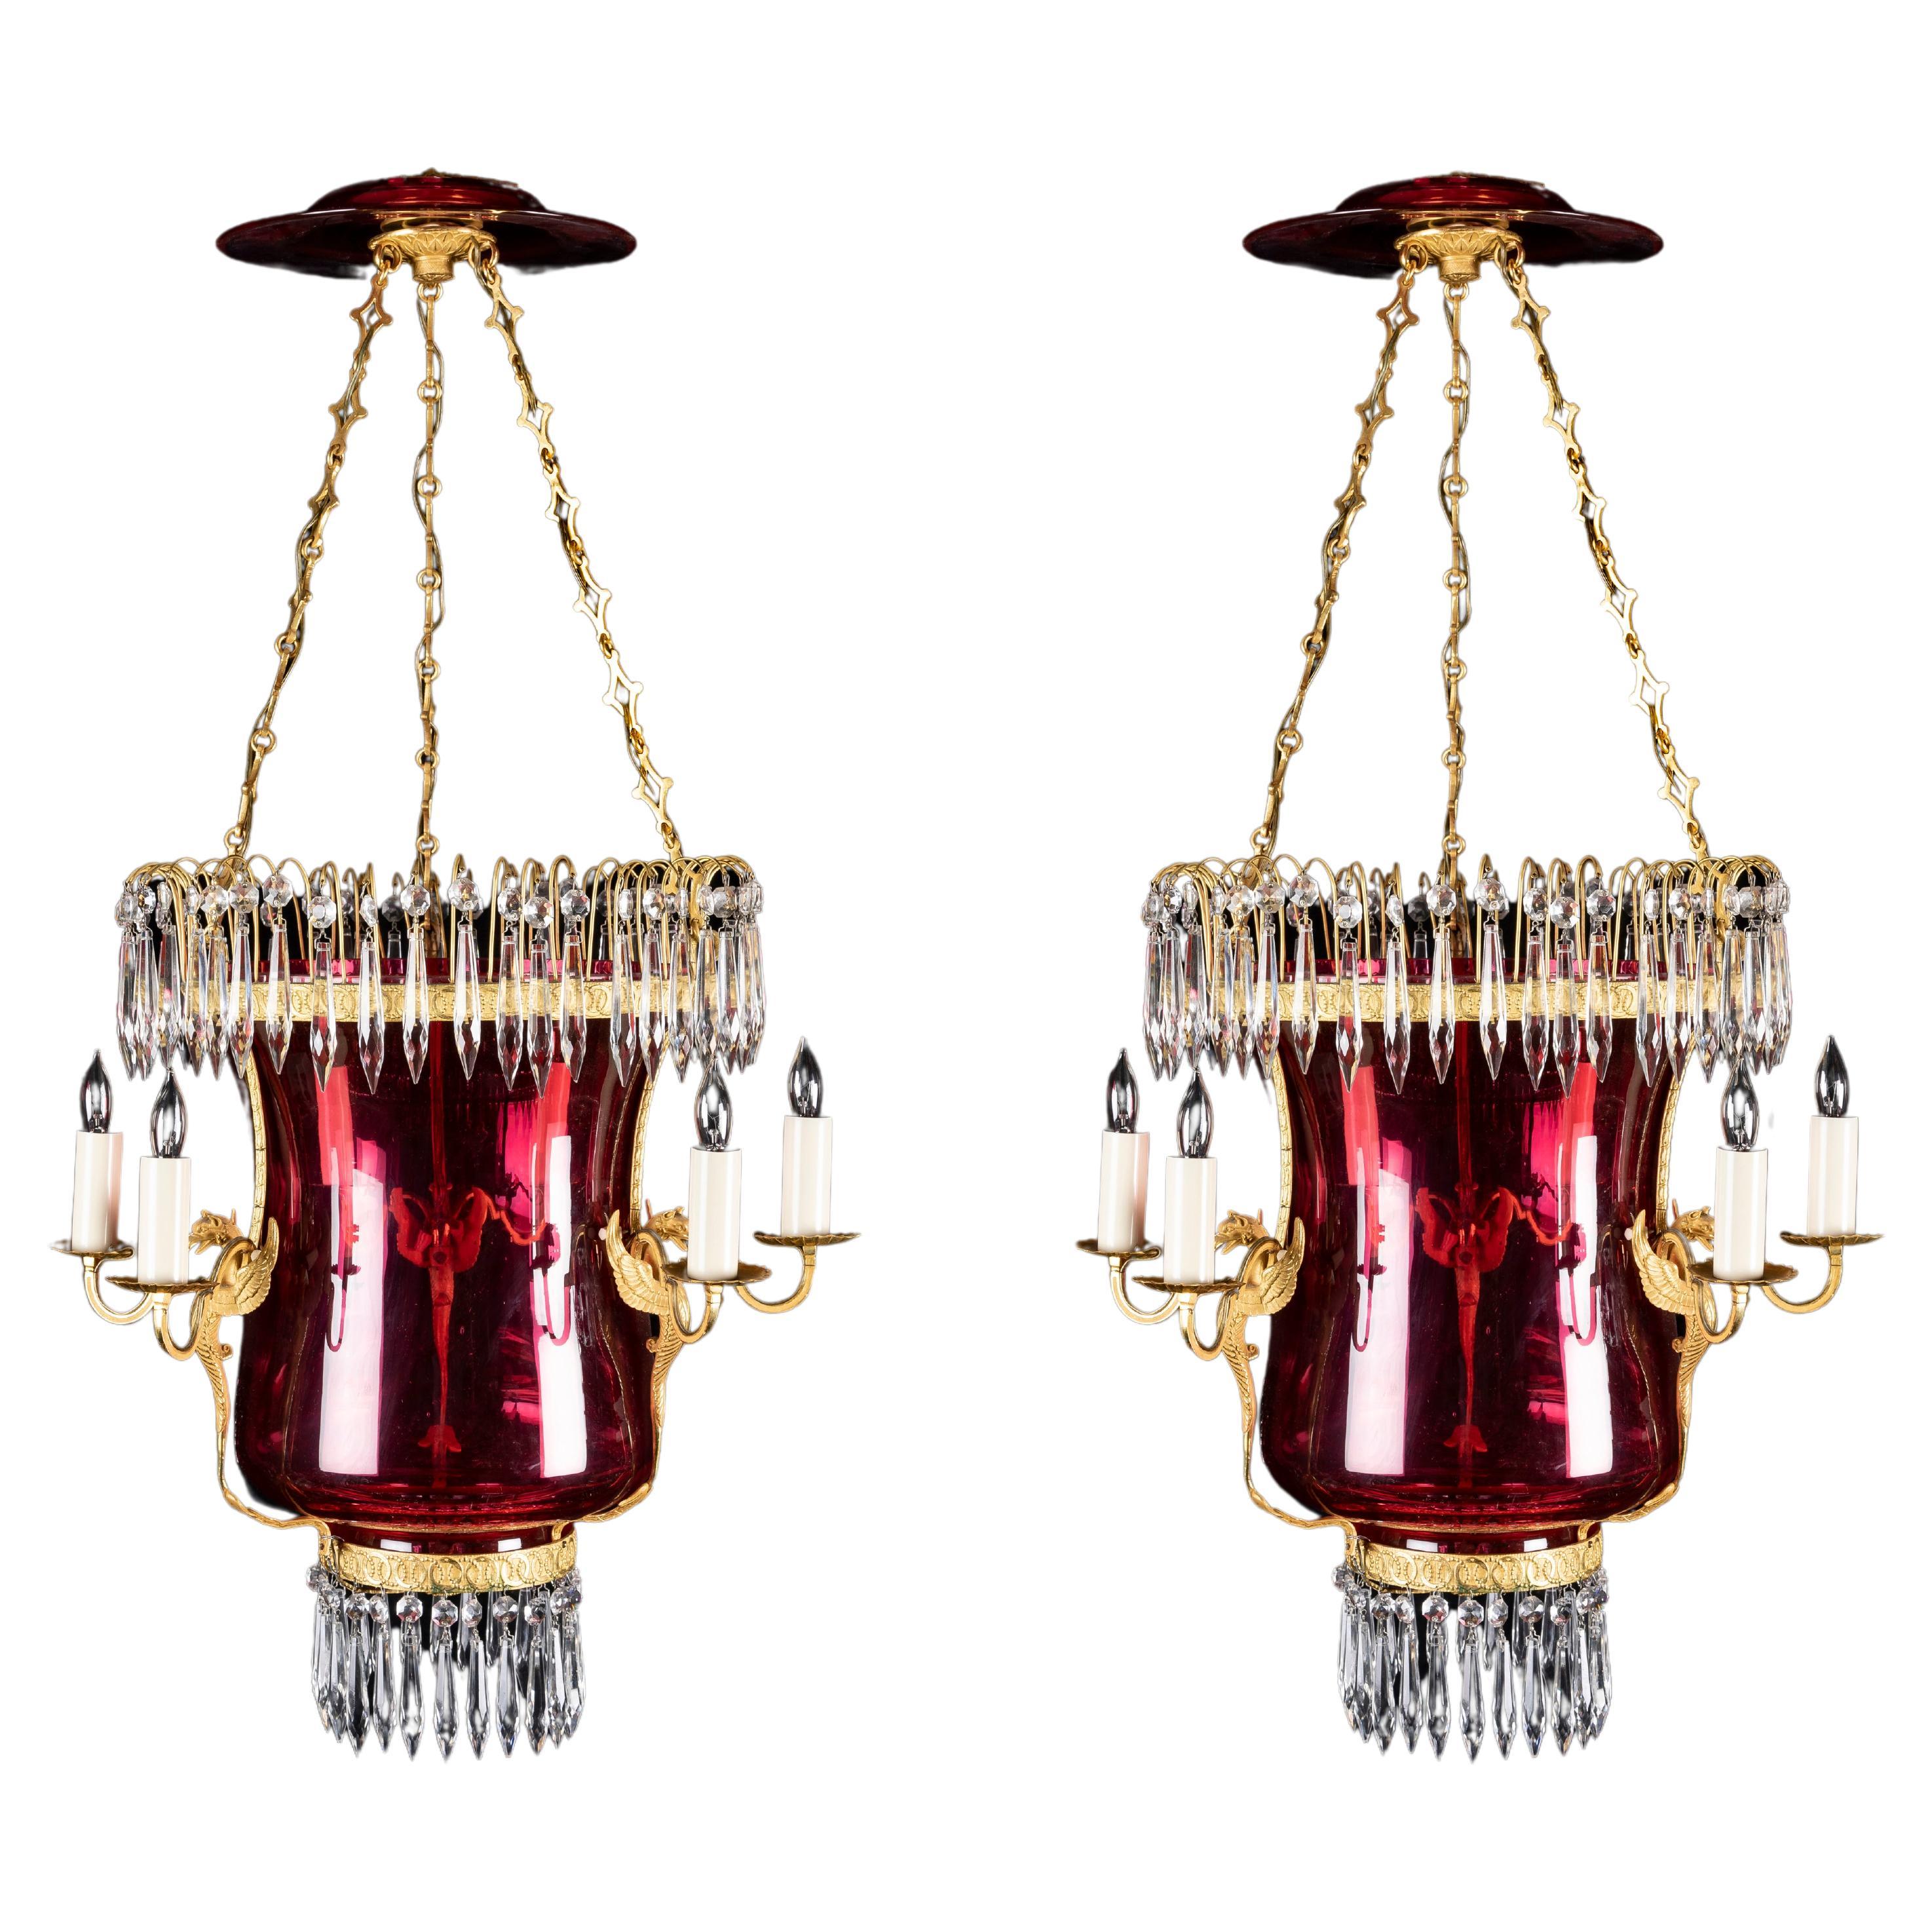 A Pair of Russian Neoclassical Cranberry glass & Gilt Bronze Lantern Chandeliers